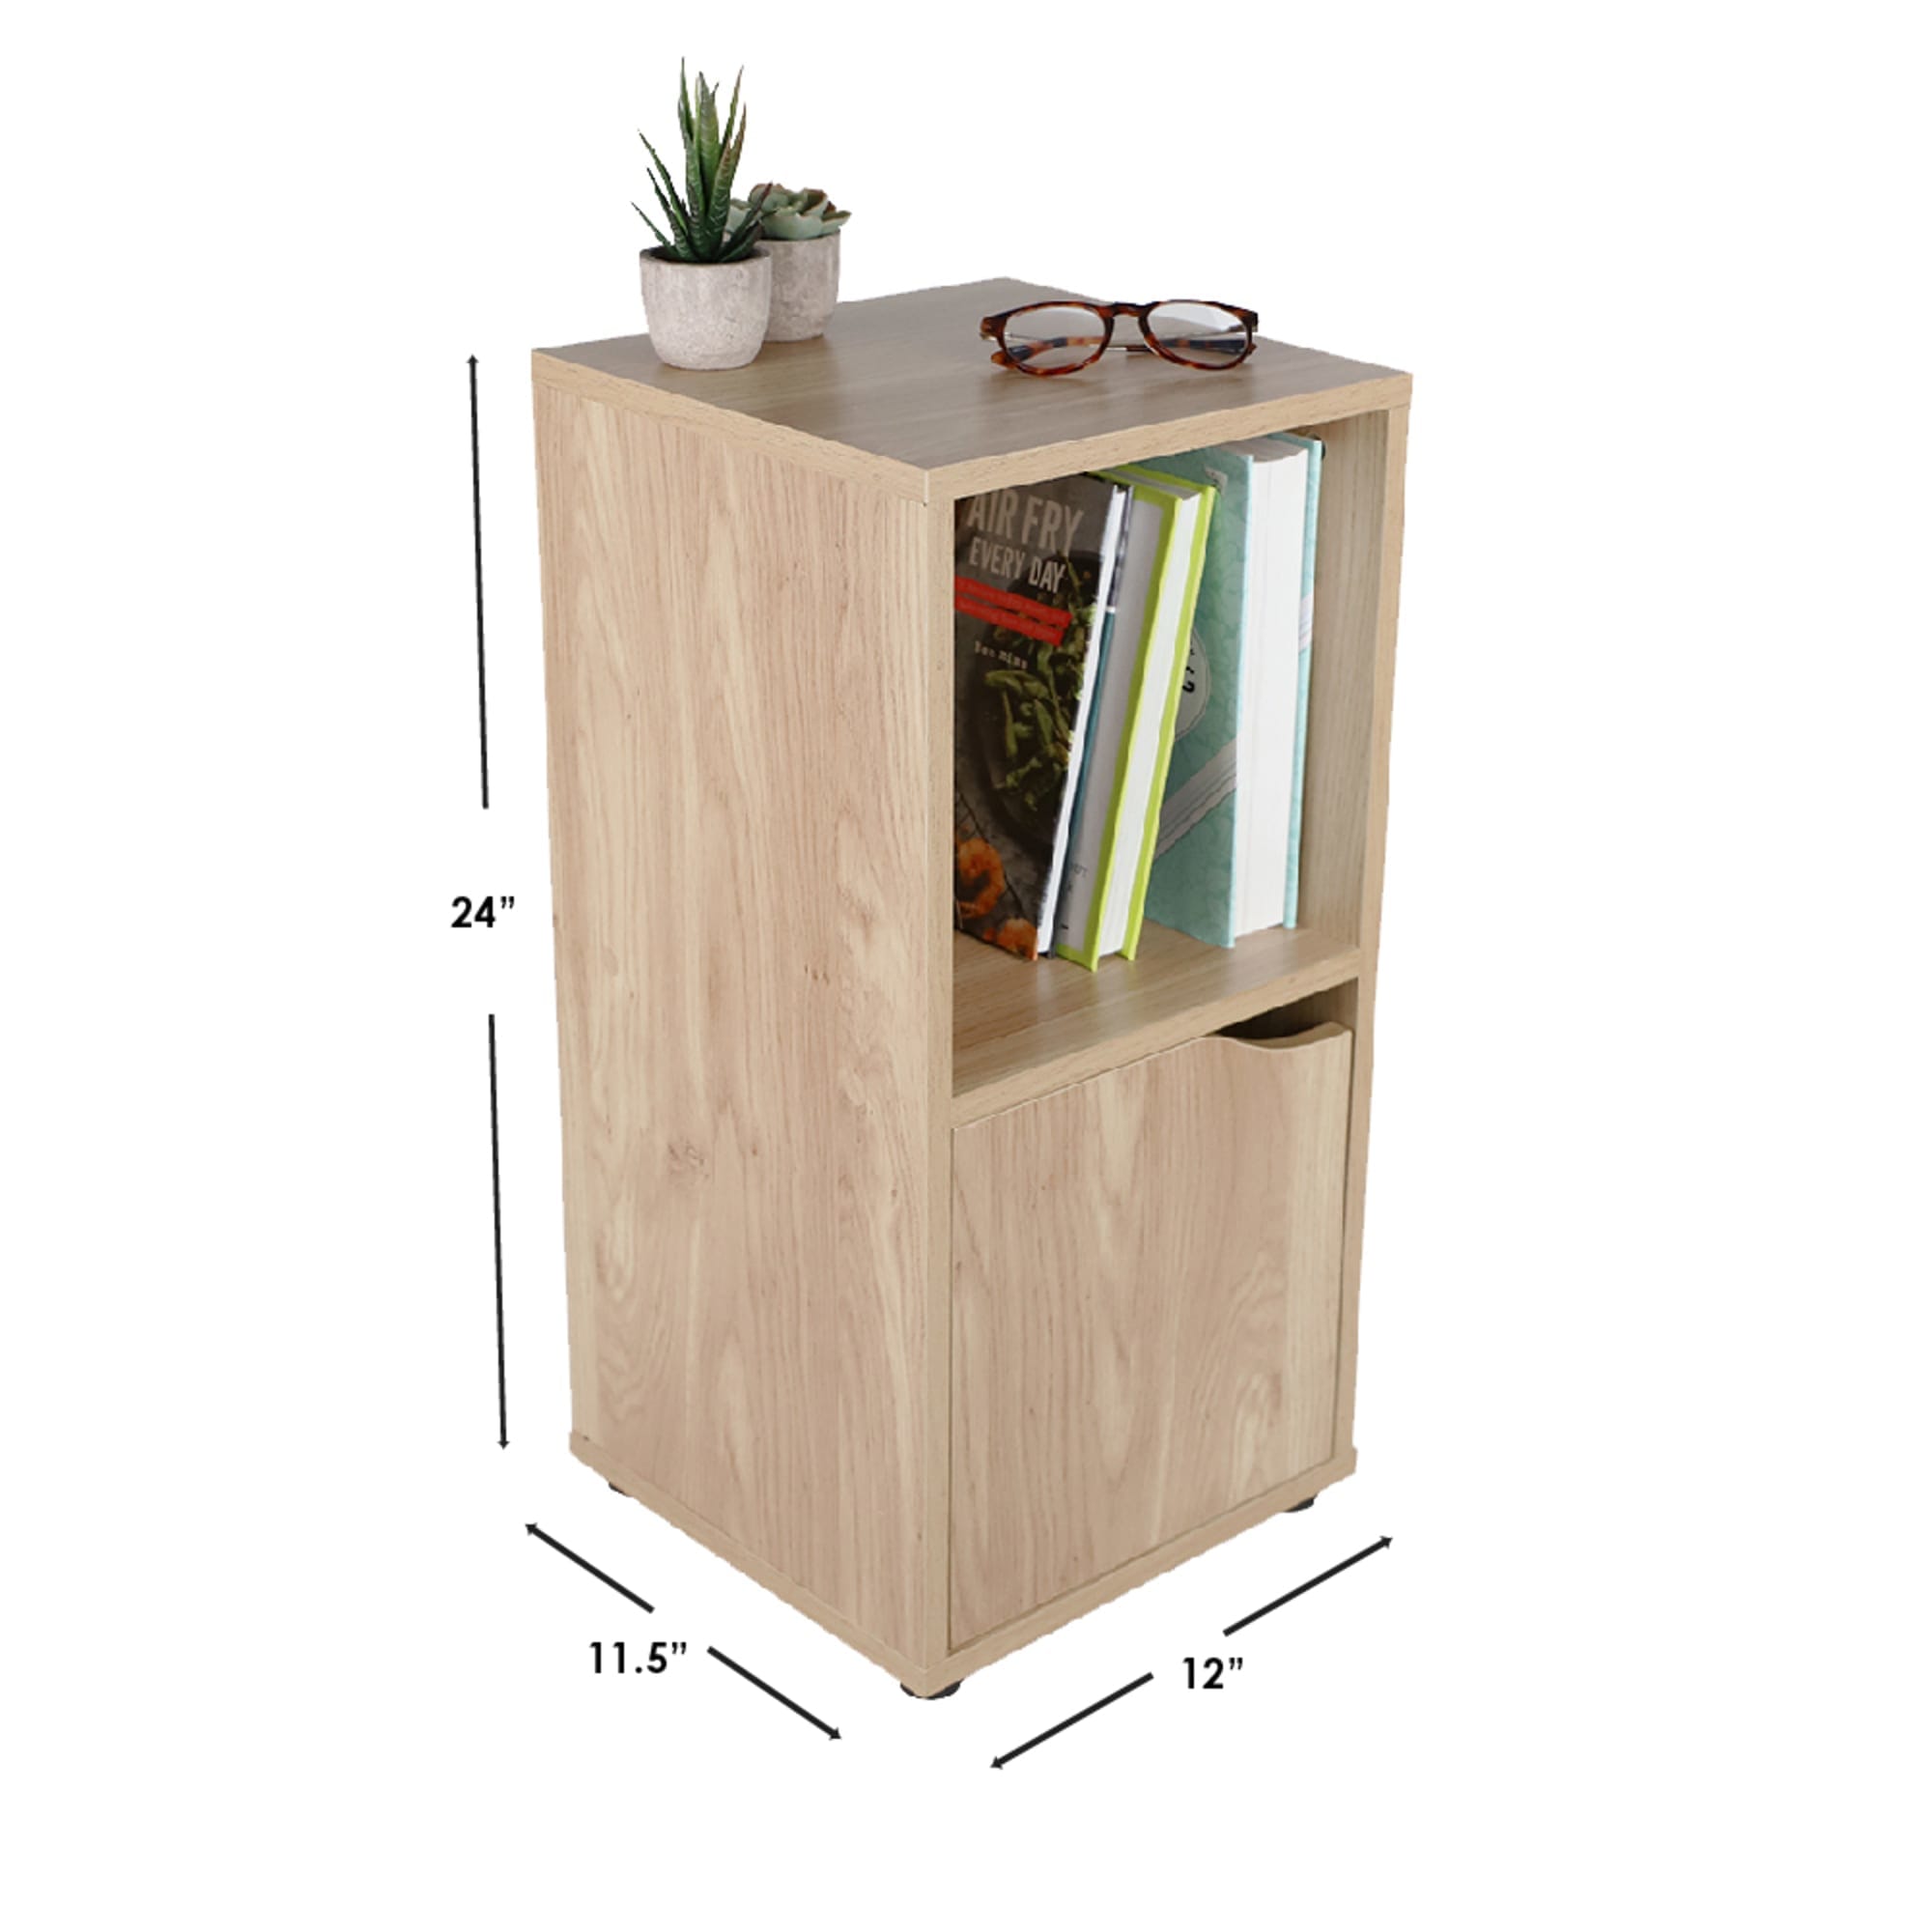 Home Basics 2 Cube MDF Storage Shelf with Door, Natural $25.00 EACH, CASE PACK OF 1